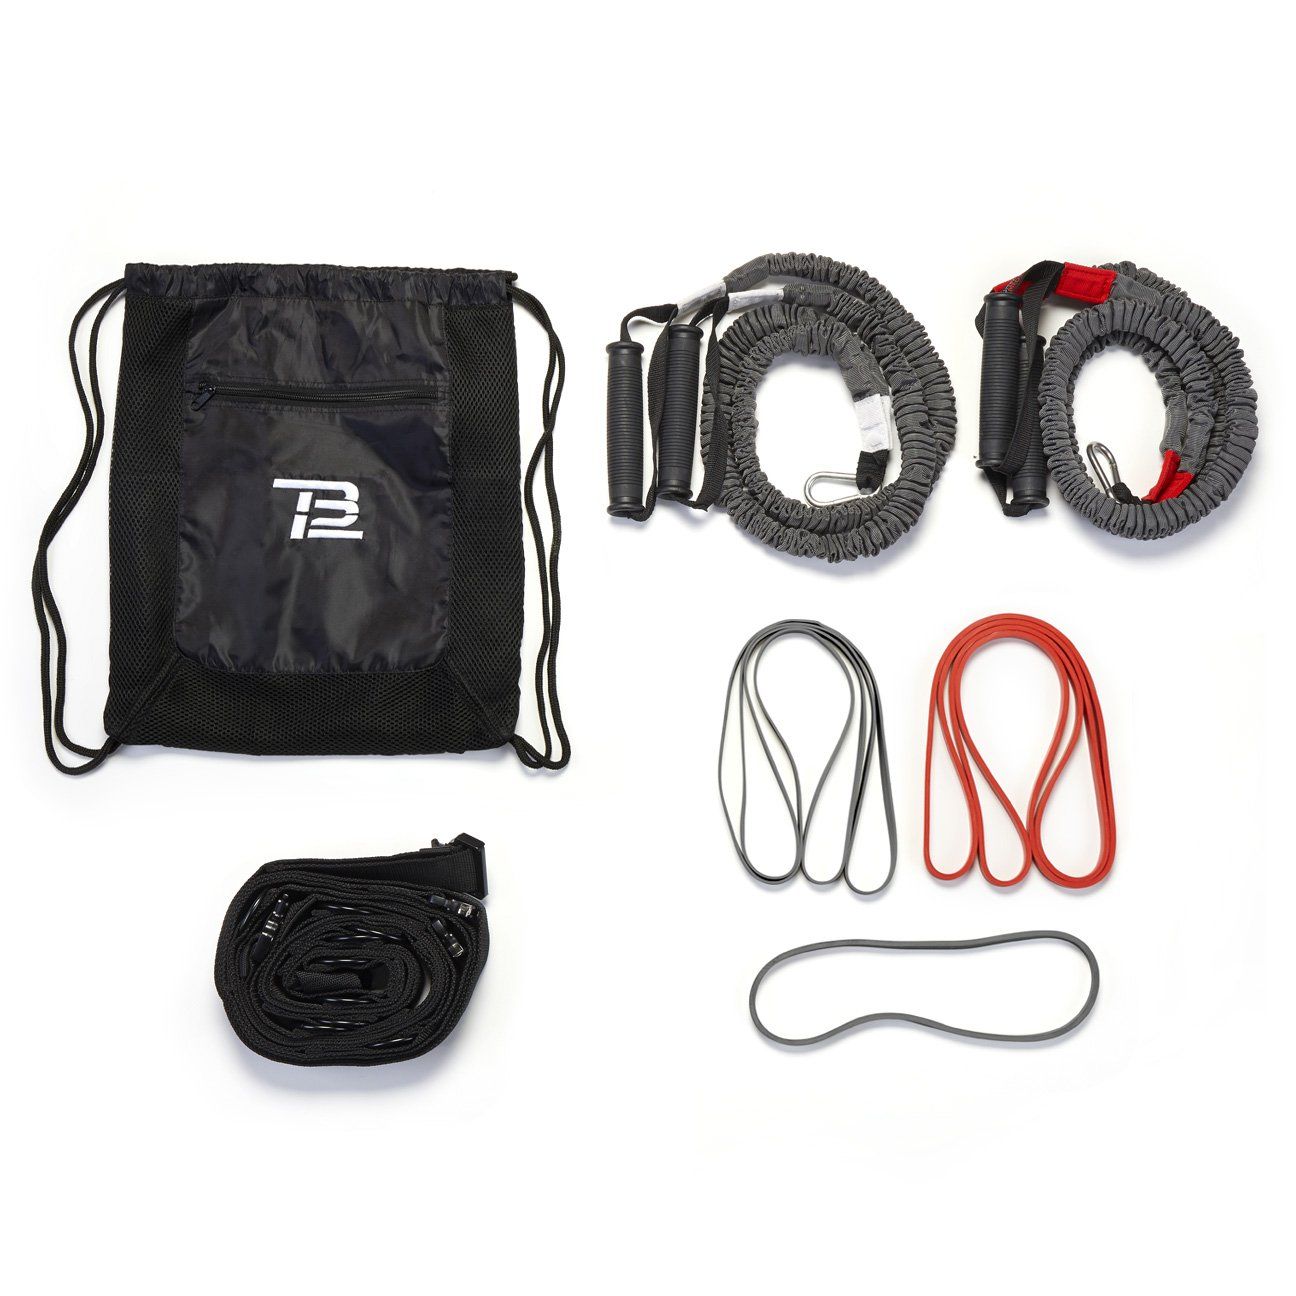 TB12 Looped and Handle Bands Kit